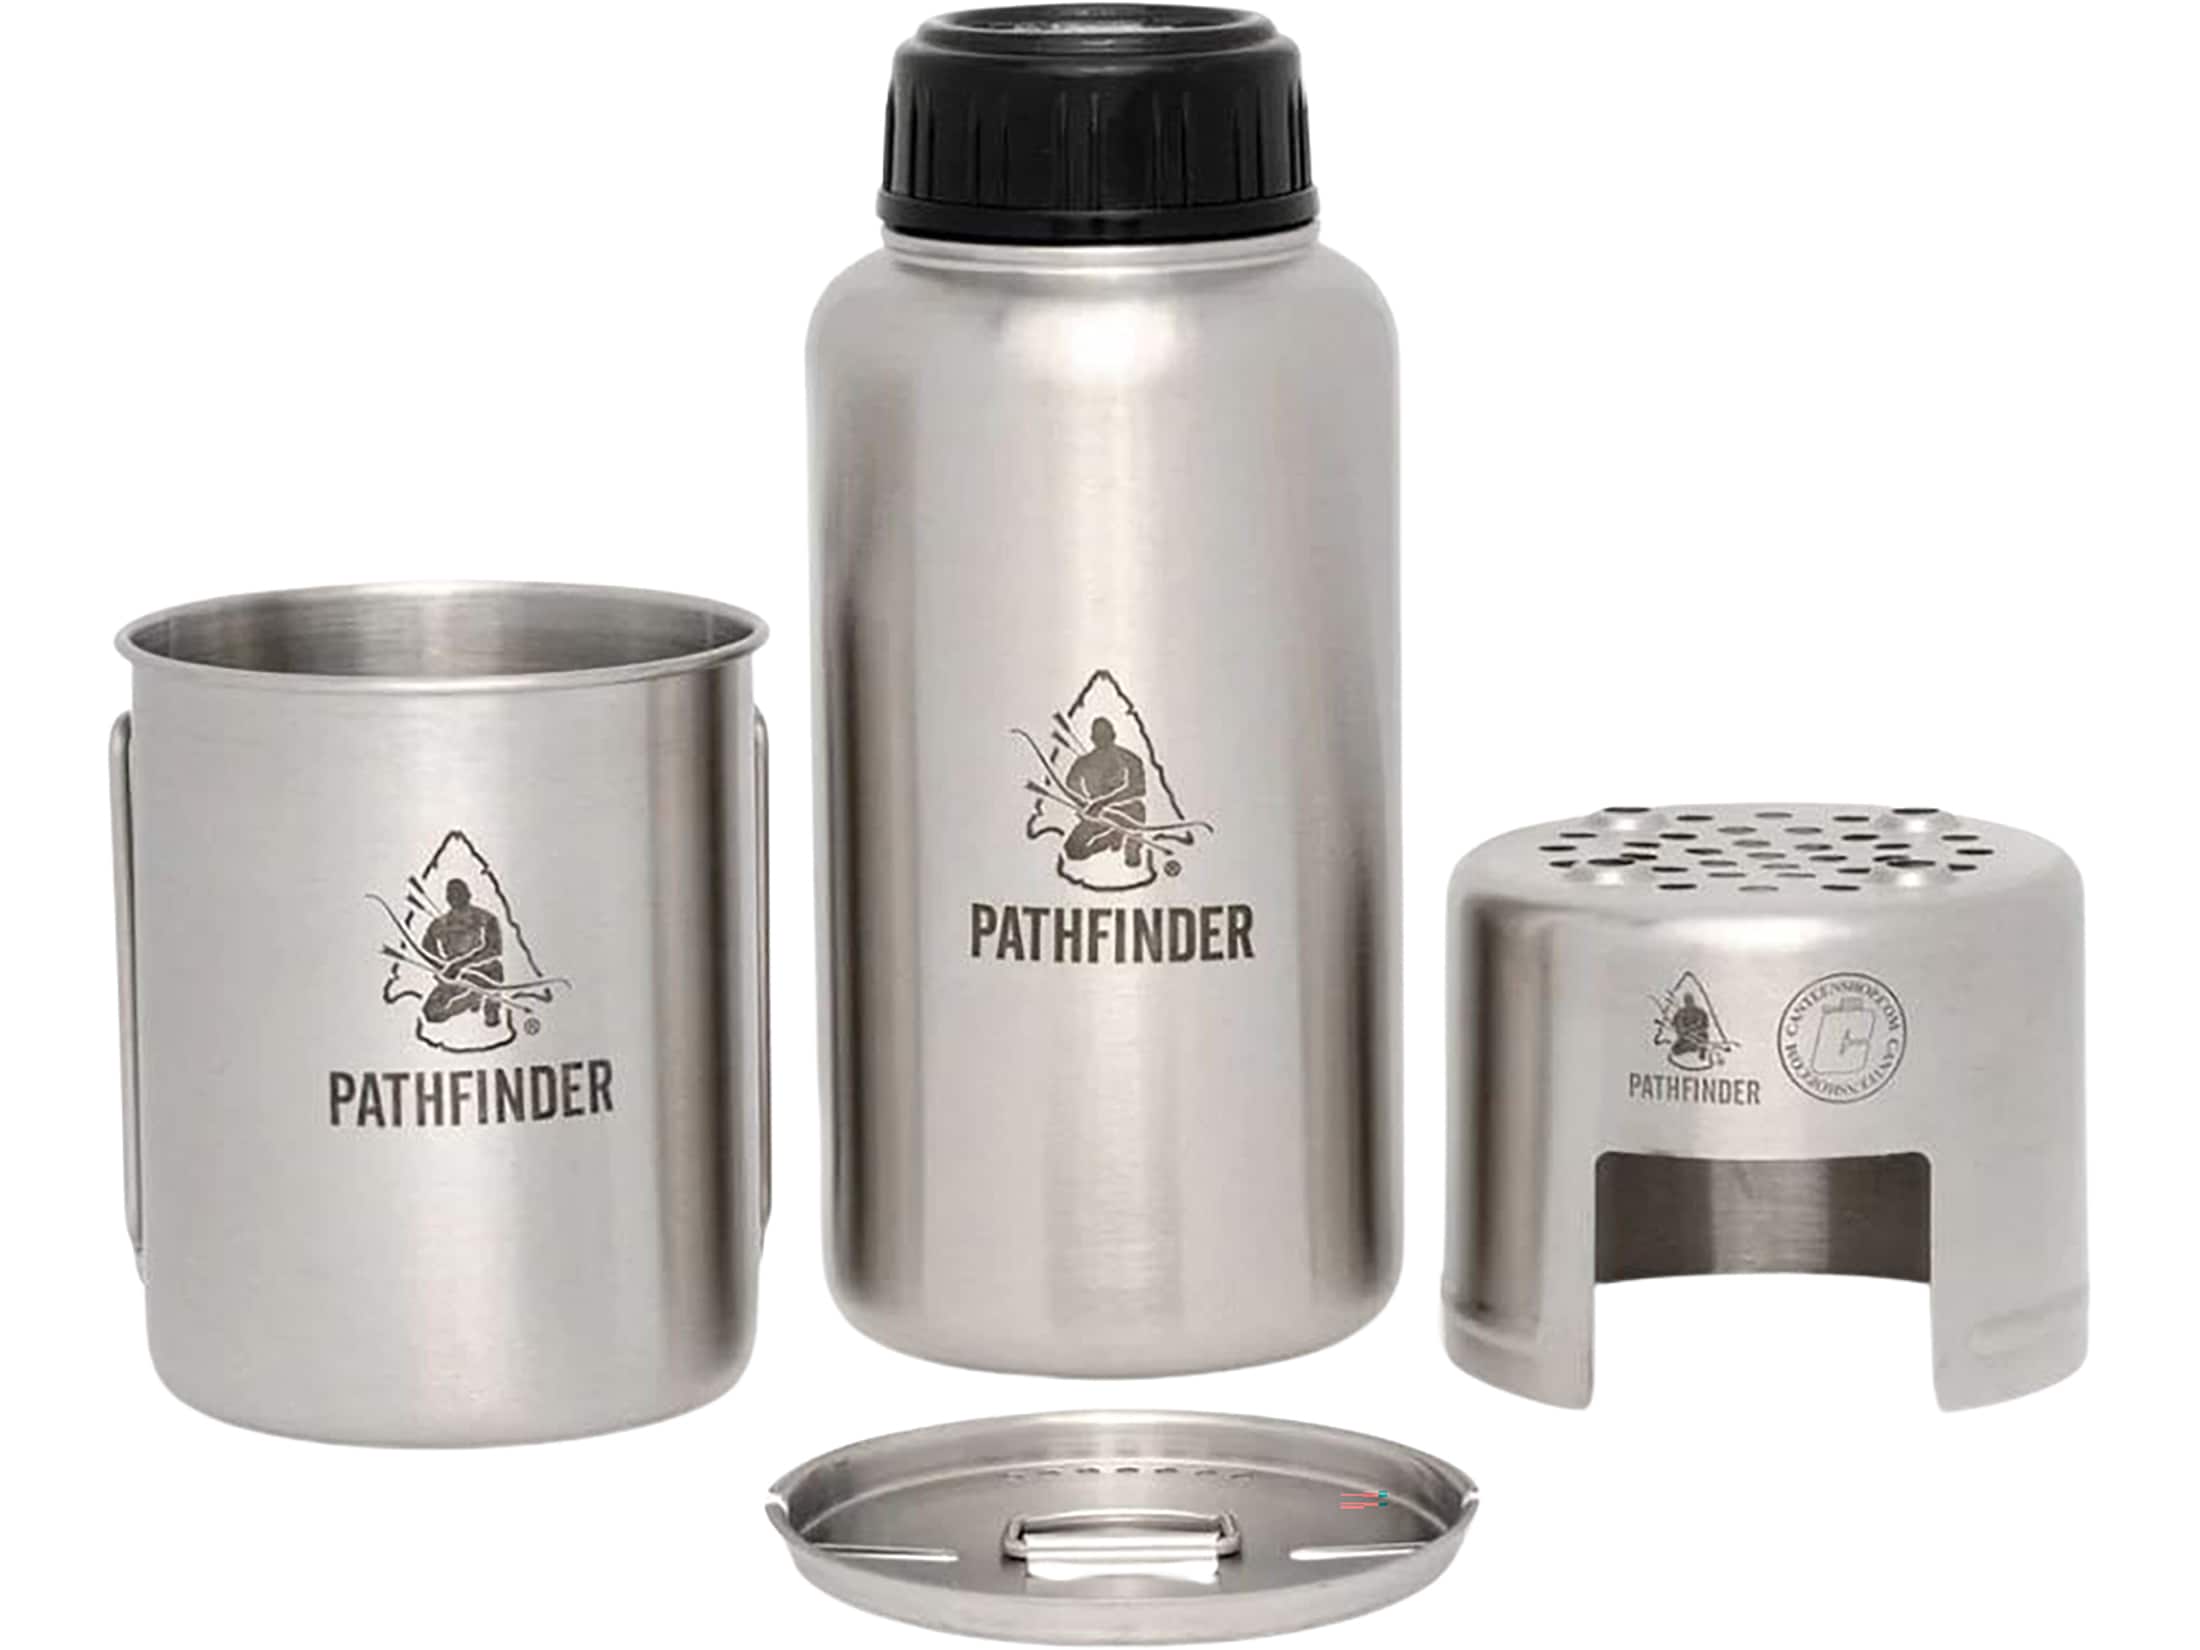 Pathfinder Insulated Cocktail Shaker 50th, 20oz - Pathfinder of WV